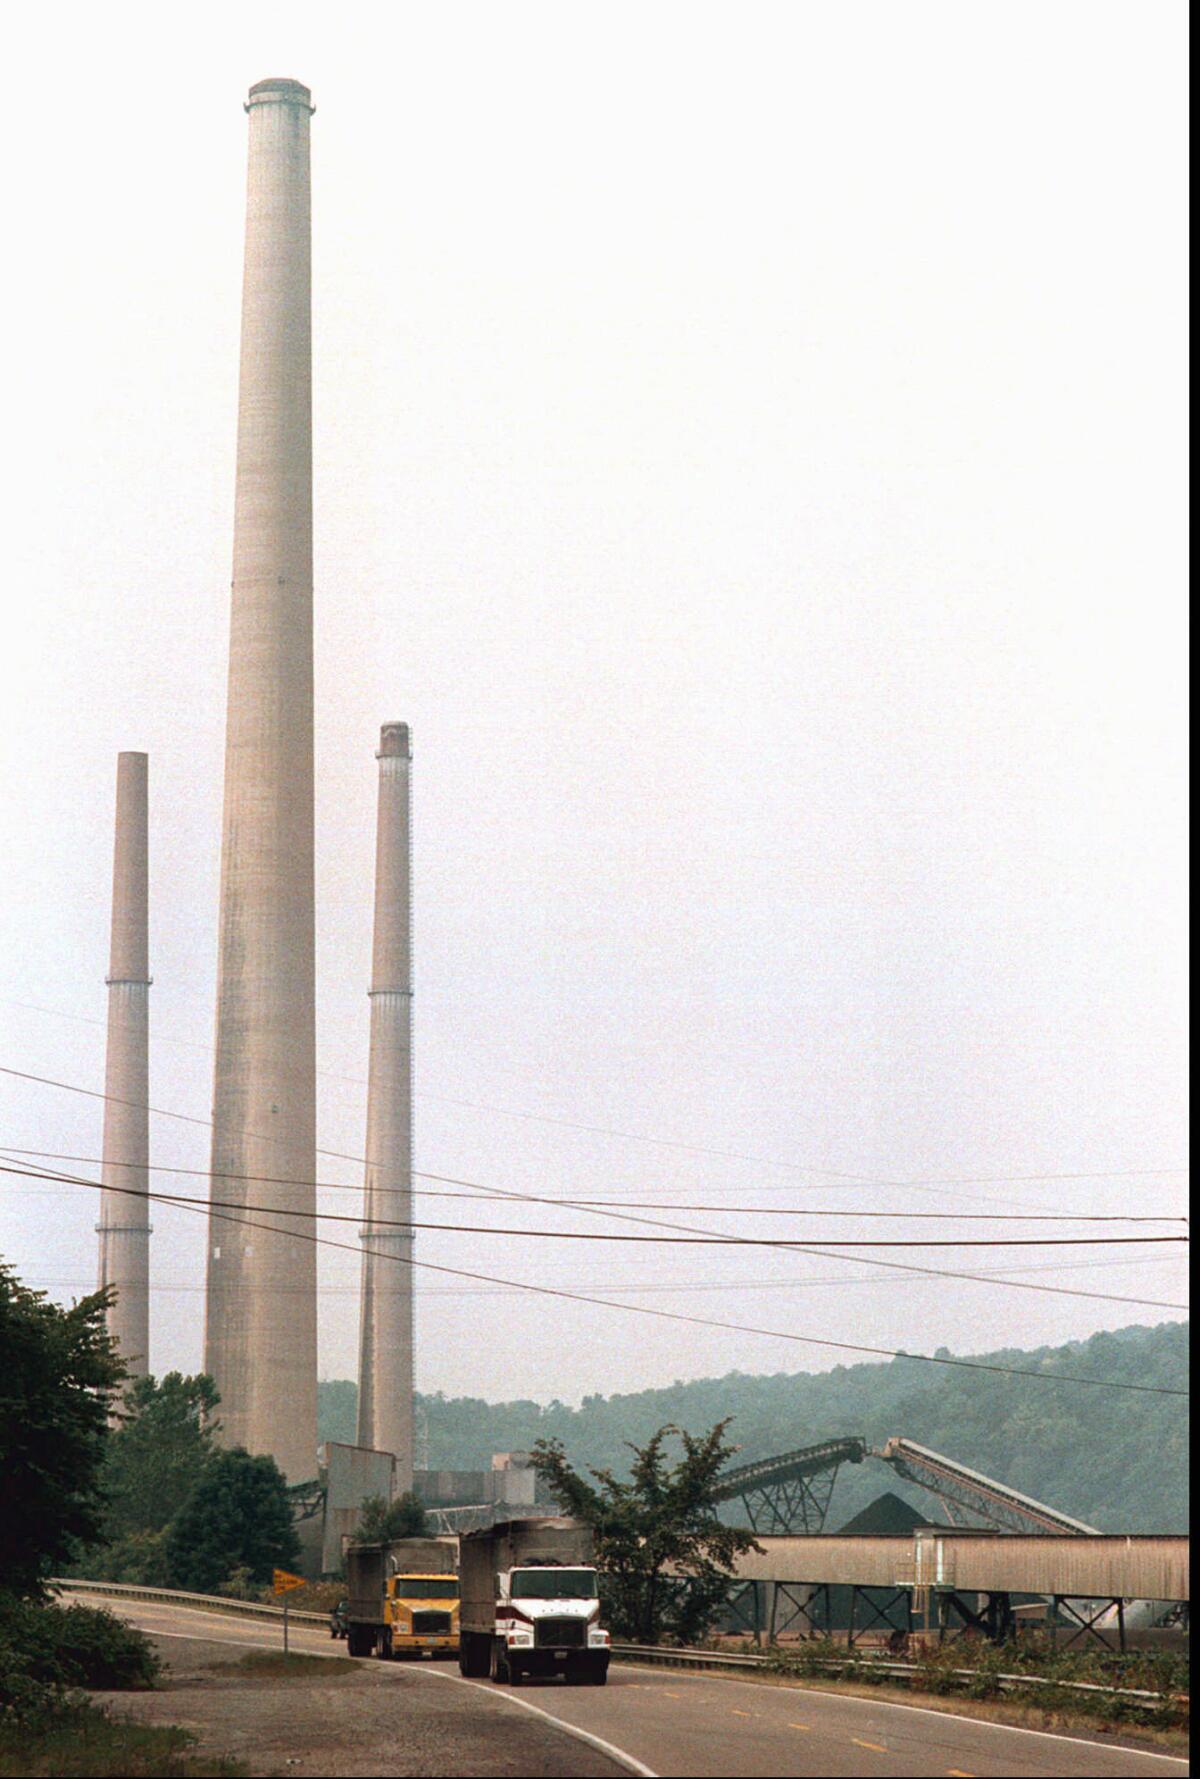 A file photo shows a 1,200-foot-high smoke stack at a coal-burning power plant in West Virginia.